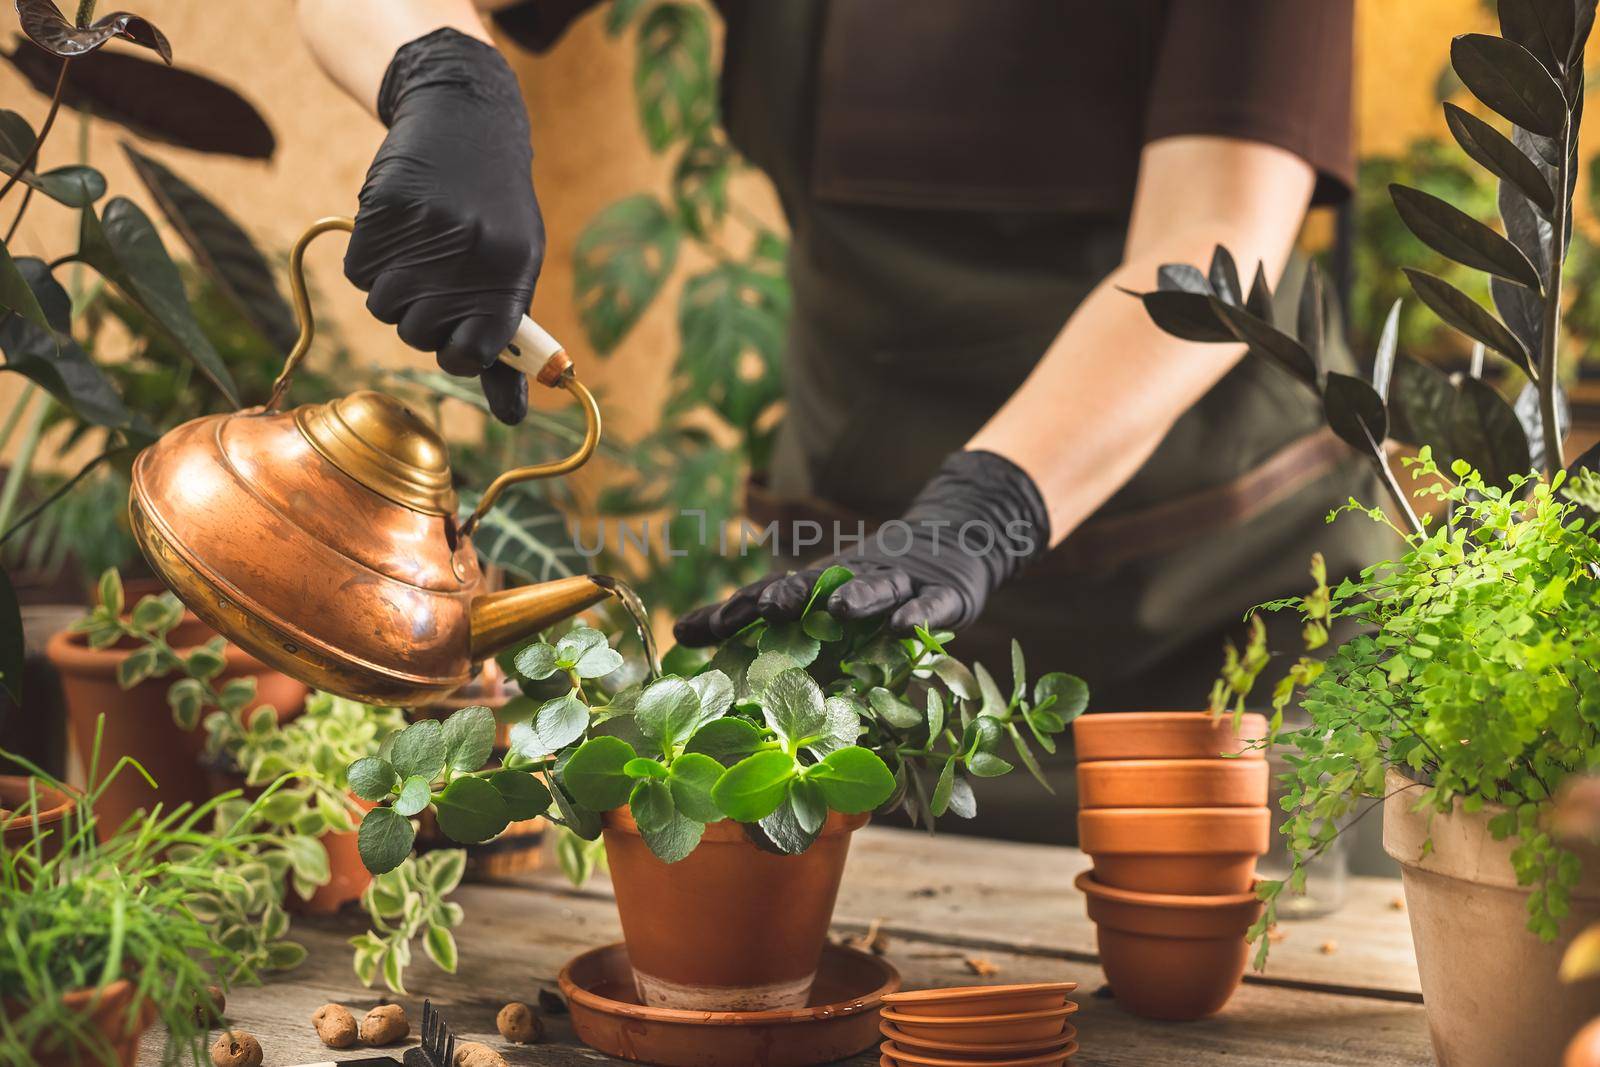 Gardener watering plants with a metal can by Syvanych